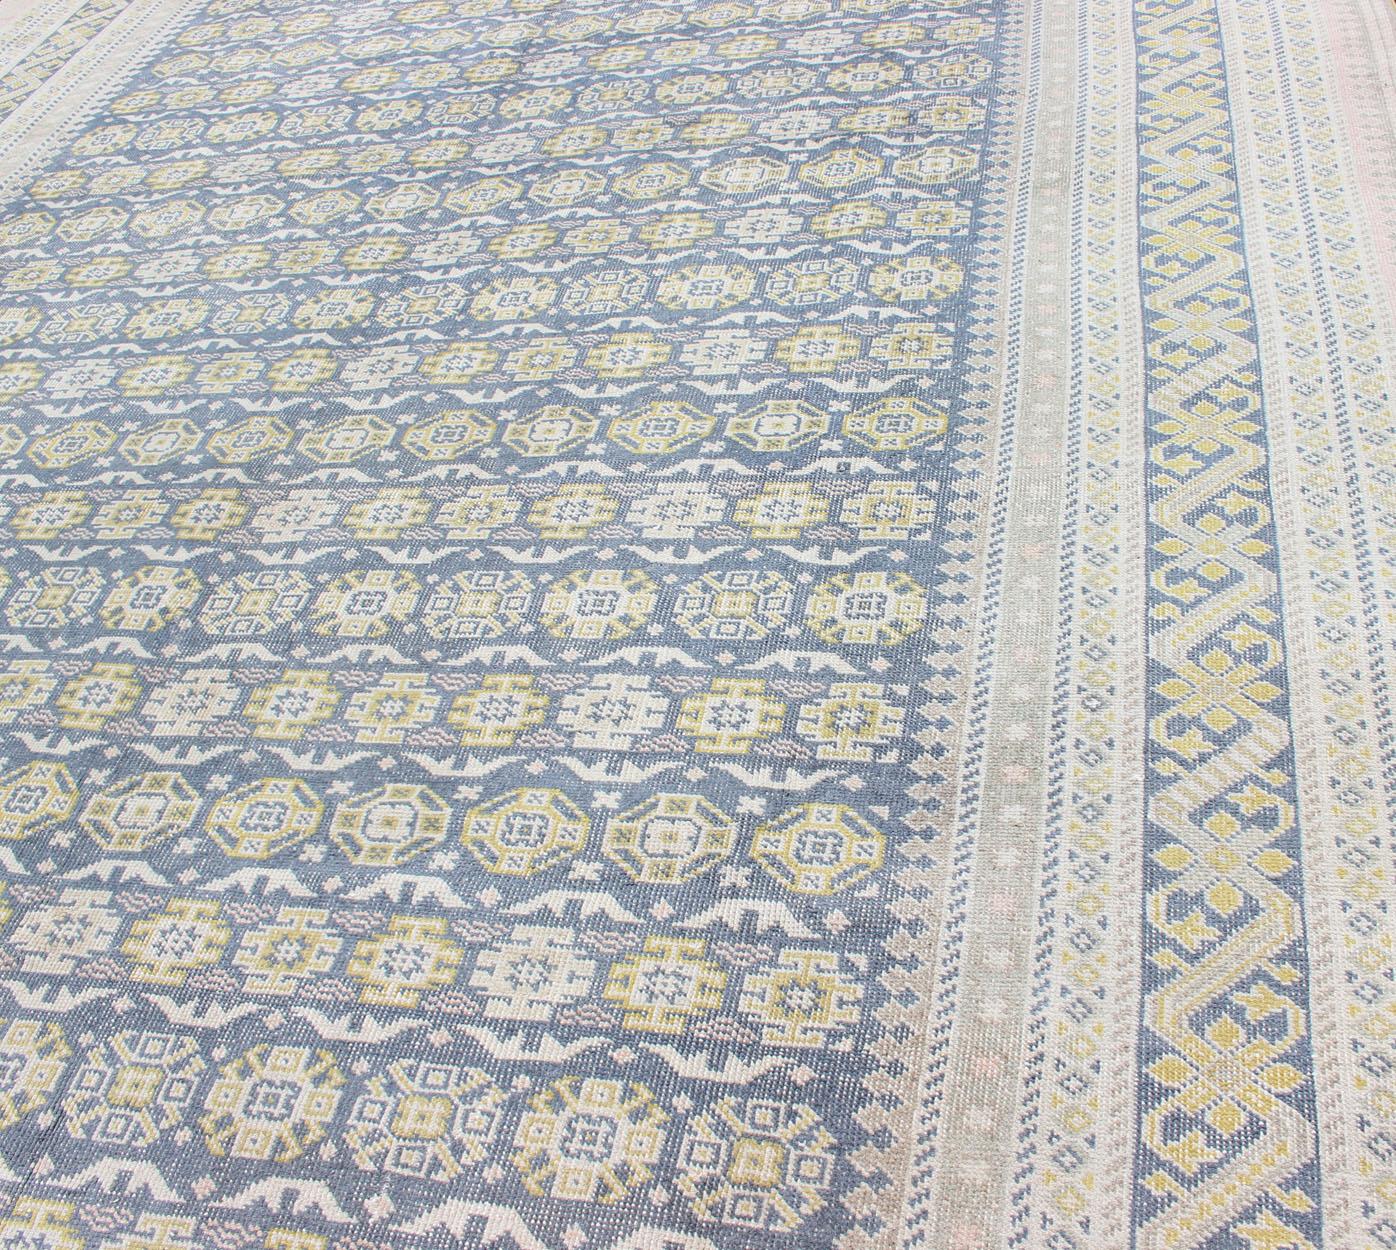 20th Century Antique Khotan Rug in Shades of Blue with Gray, L. Pink and Yellow Accents For Sale